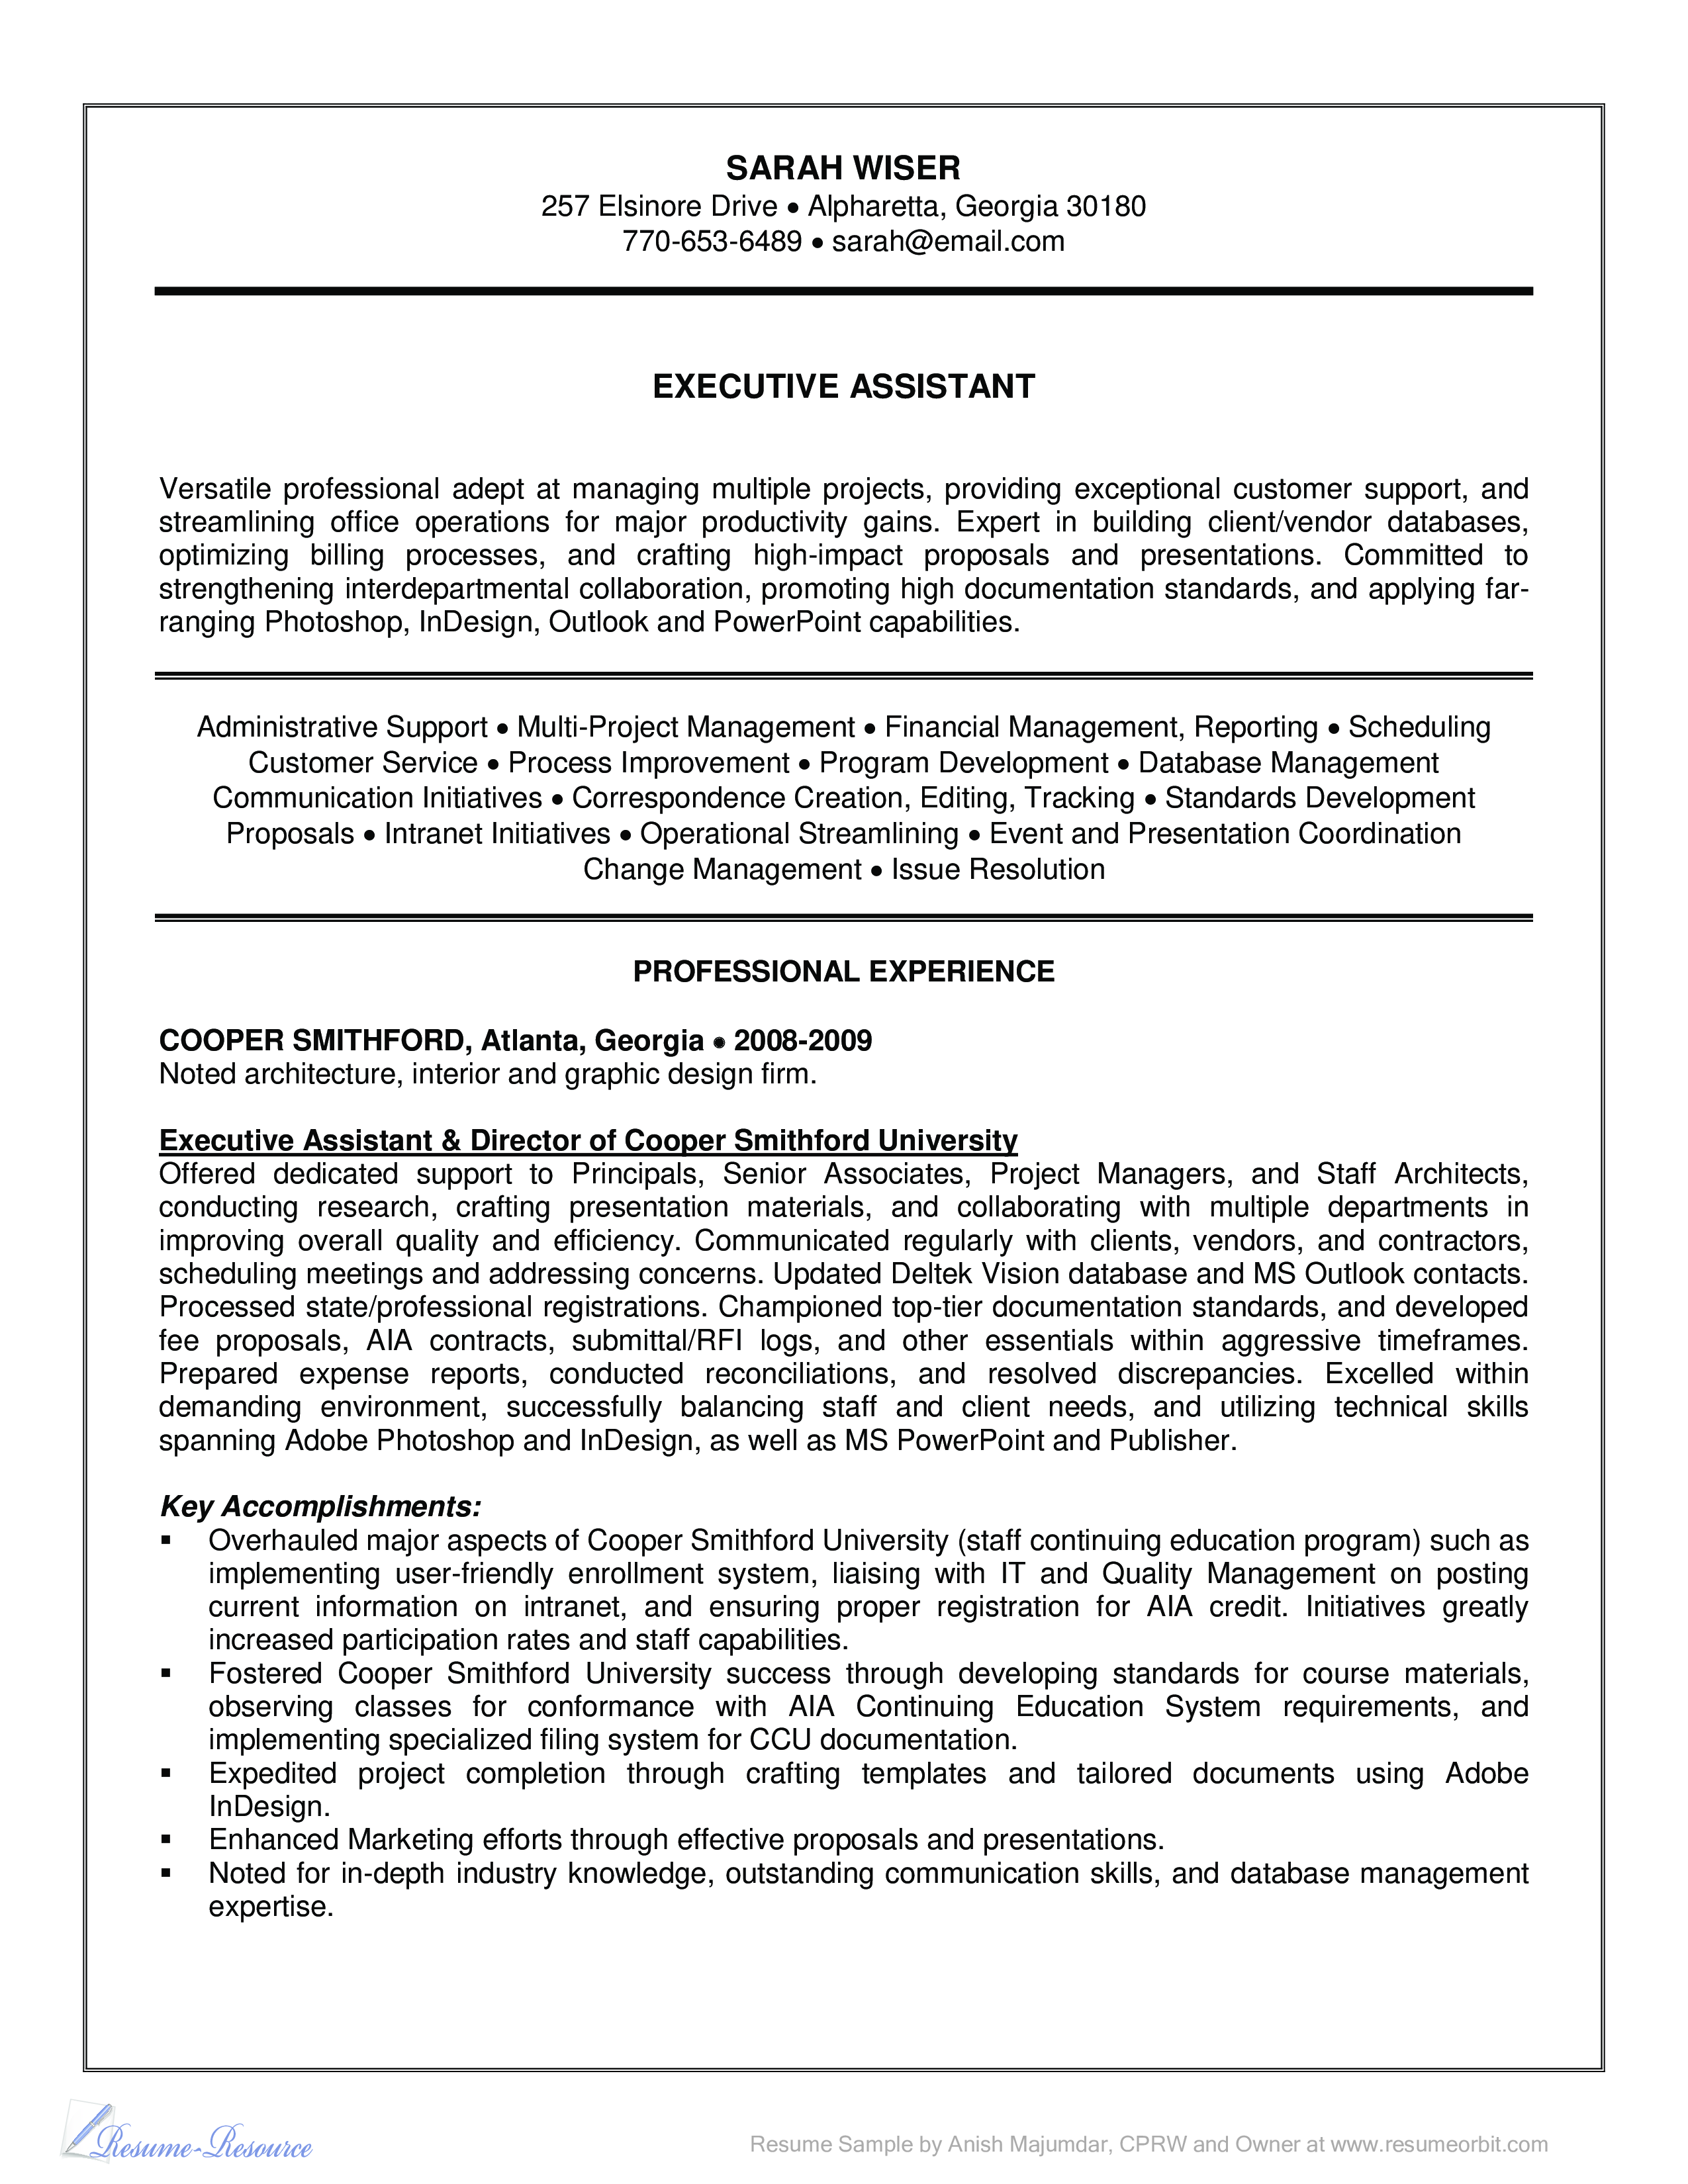 Executive Assistant Resume main image